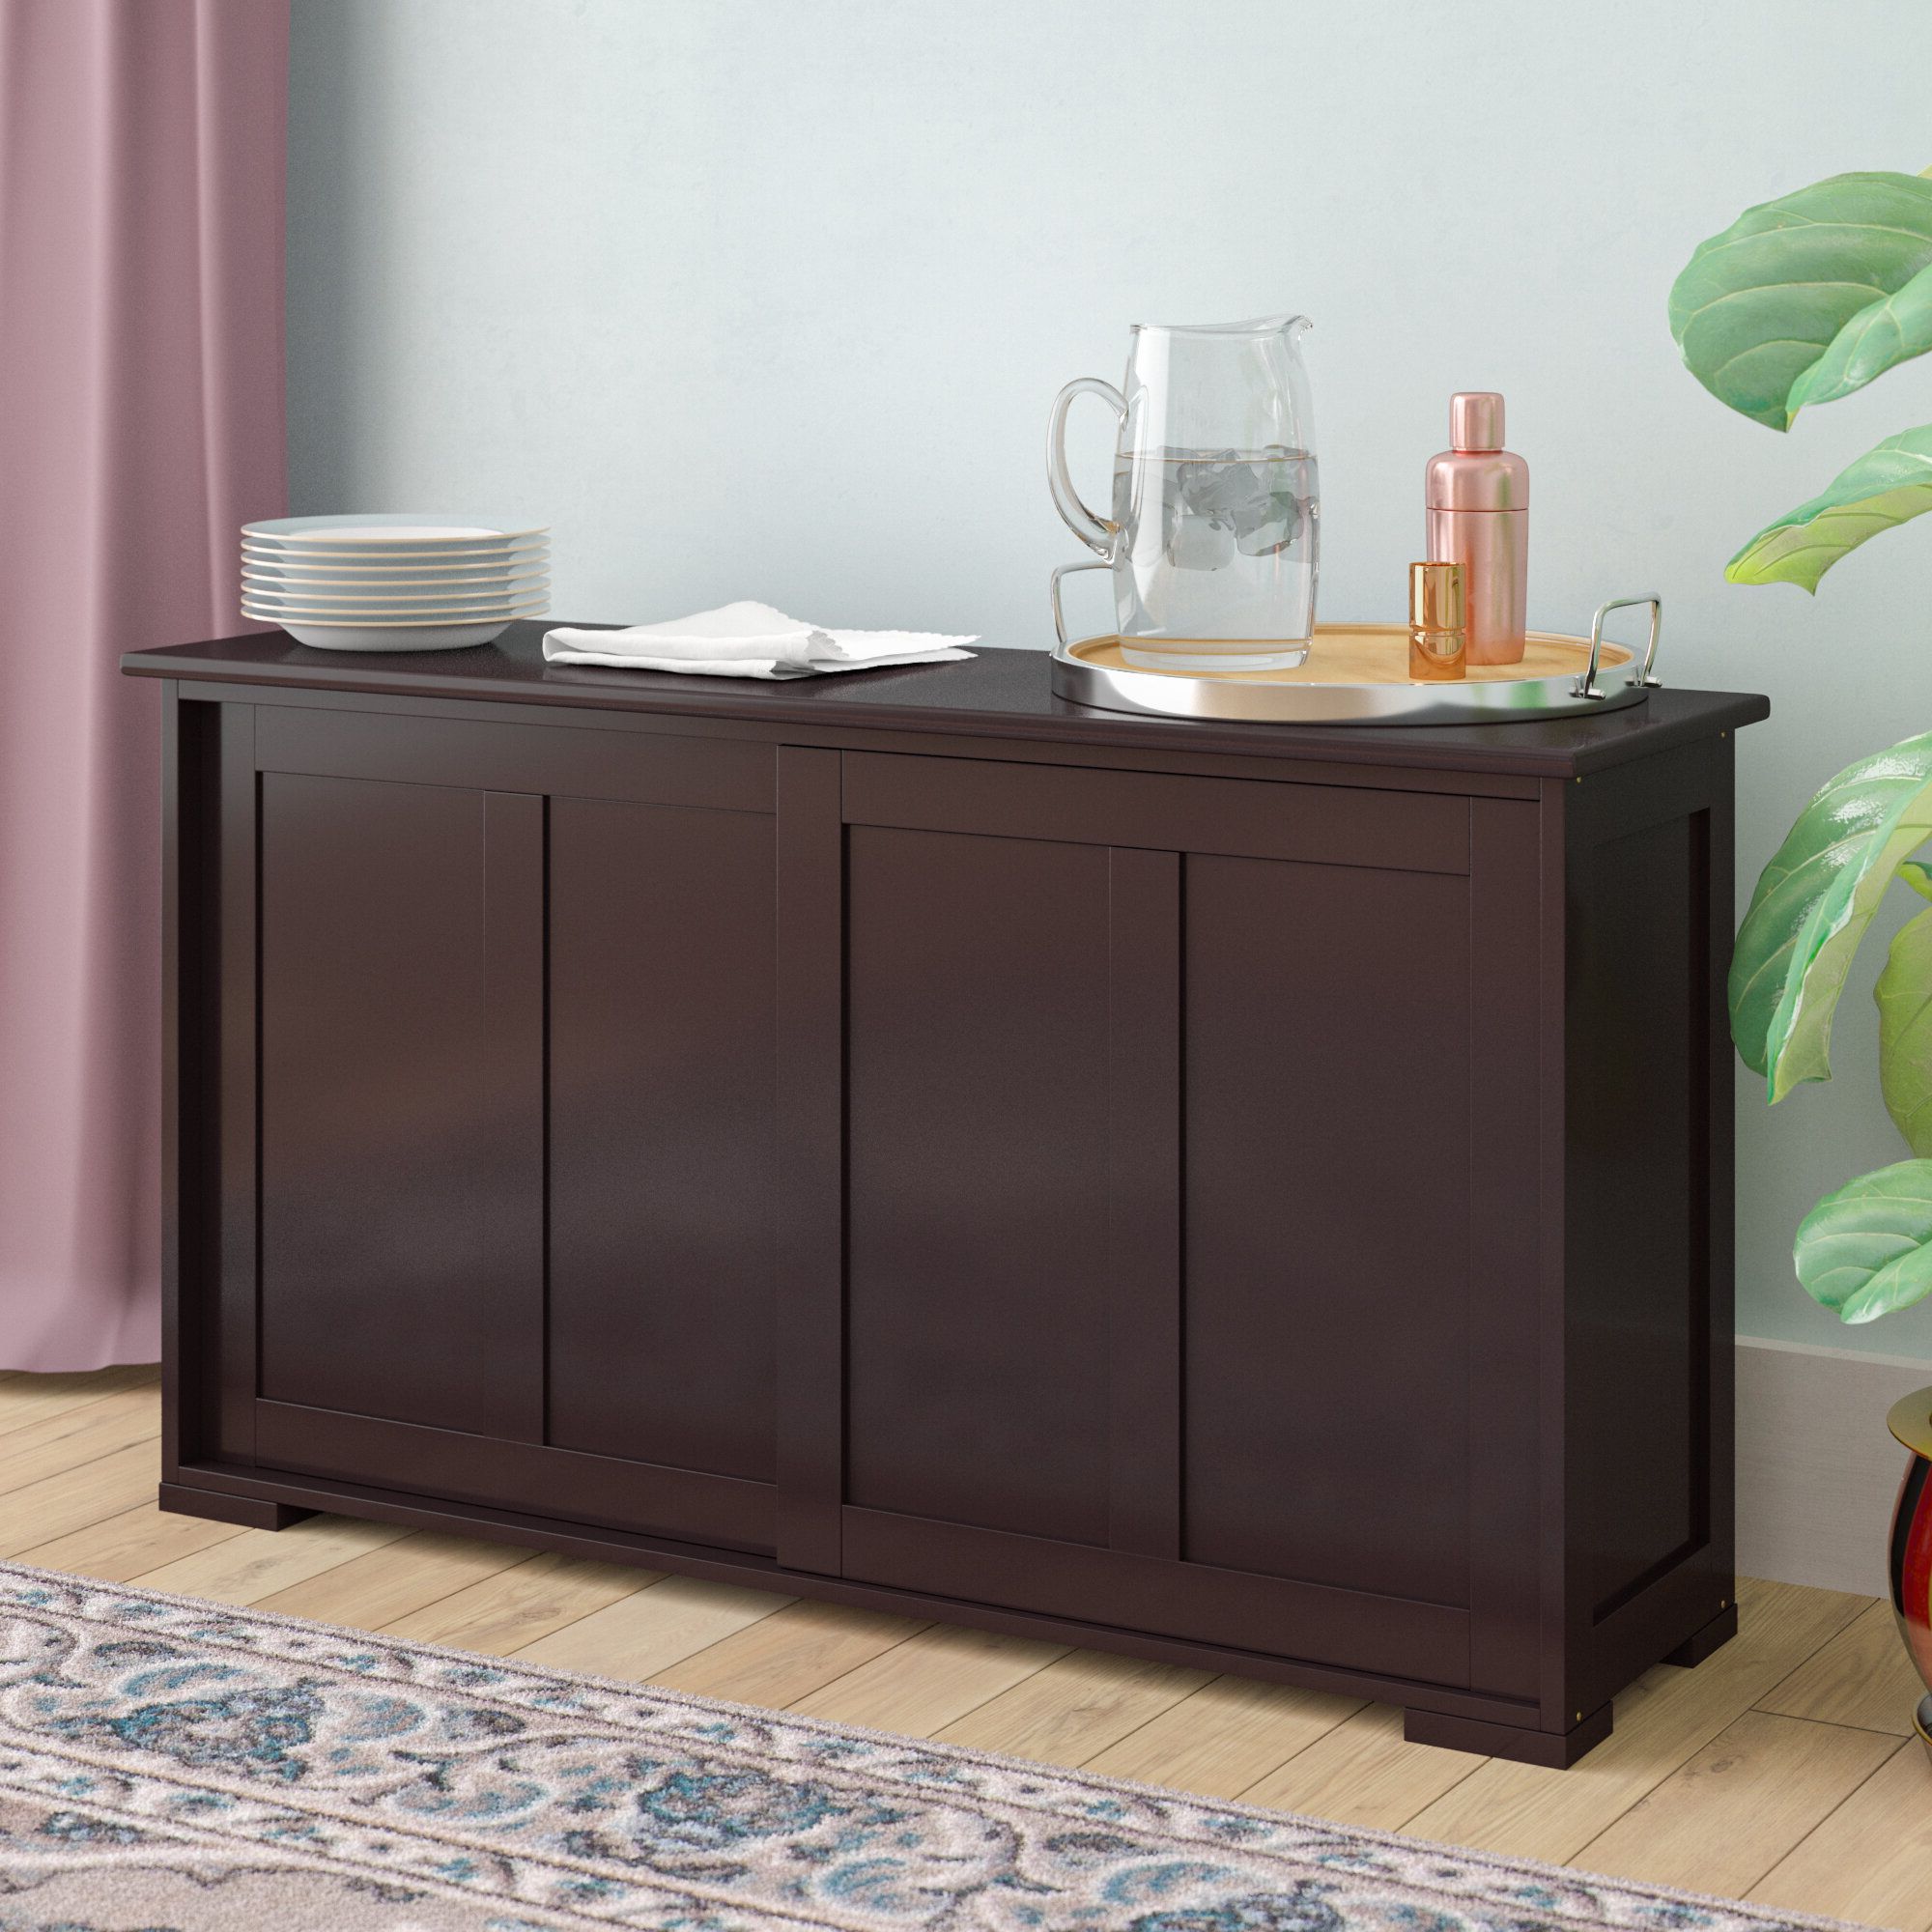 Sideboards & Buffet Tables You'll Love In 2019 | Wayfair Inside Chicoree Charlena Sideboards (View 17 of 20)